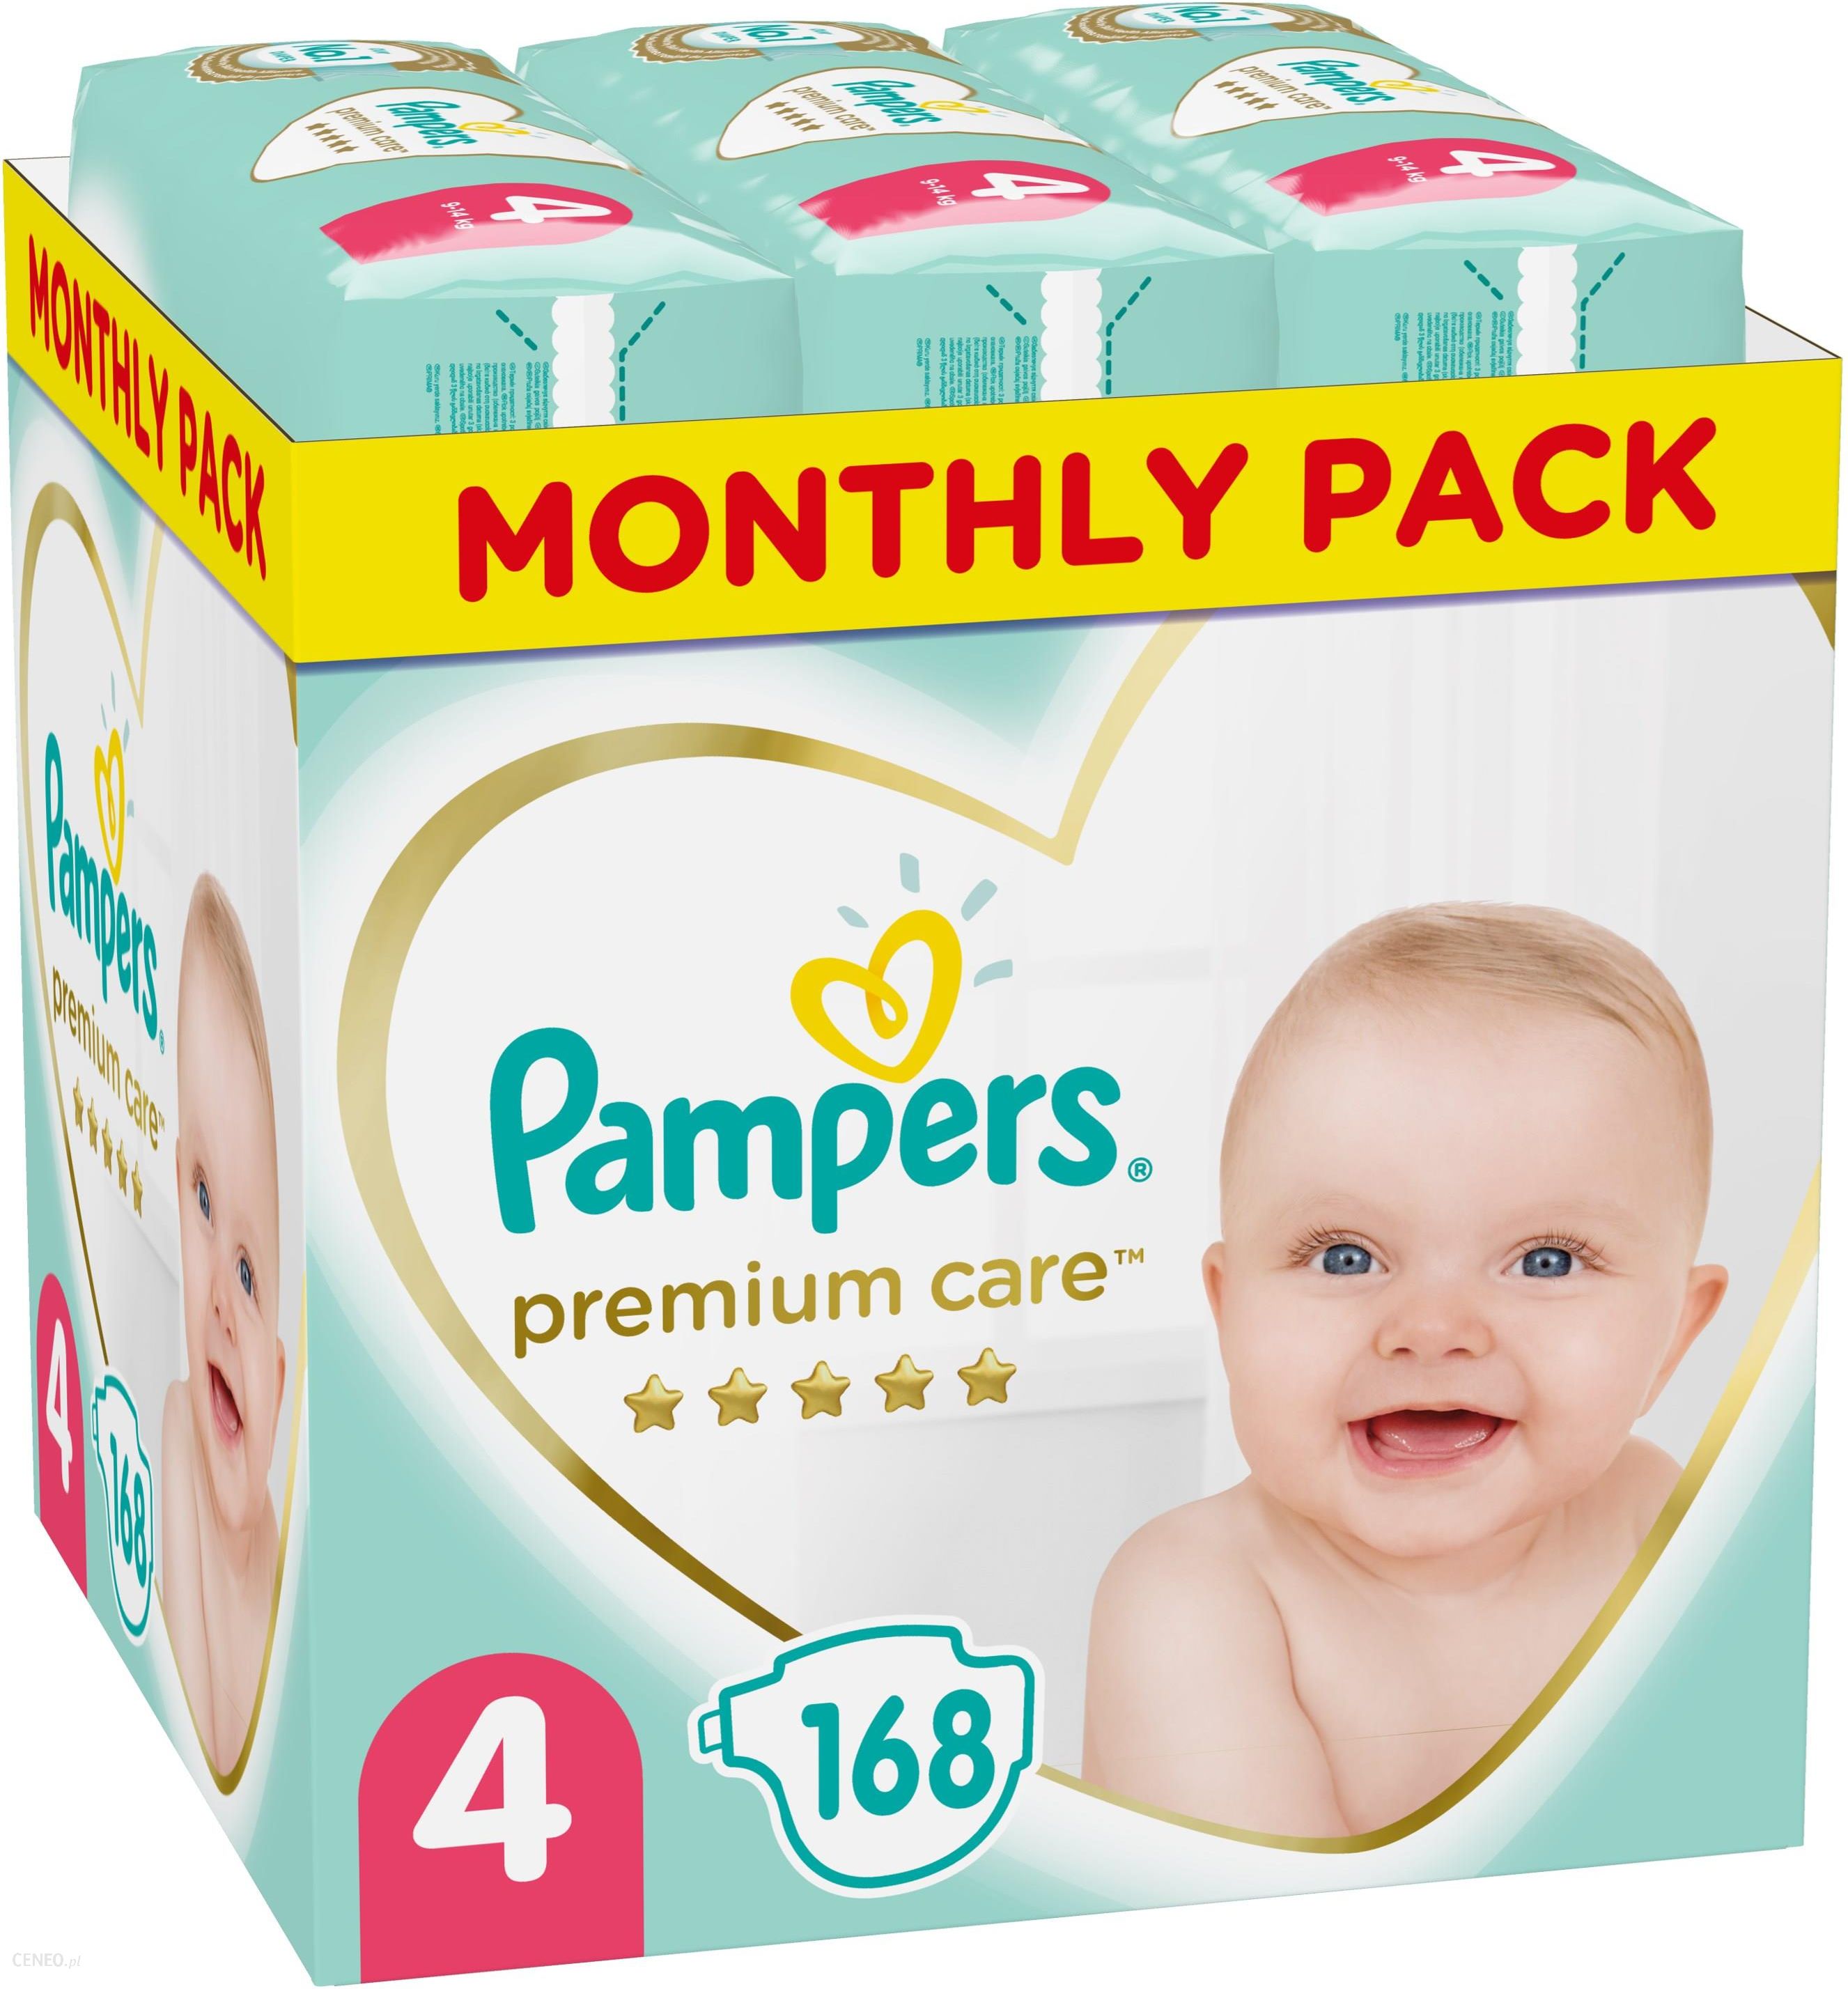 leclerc pampers